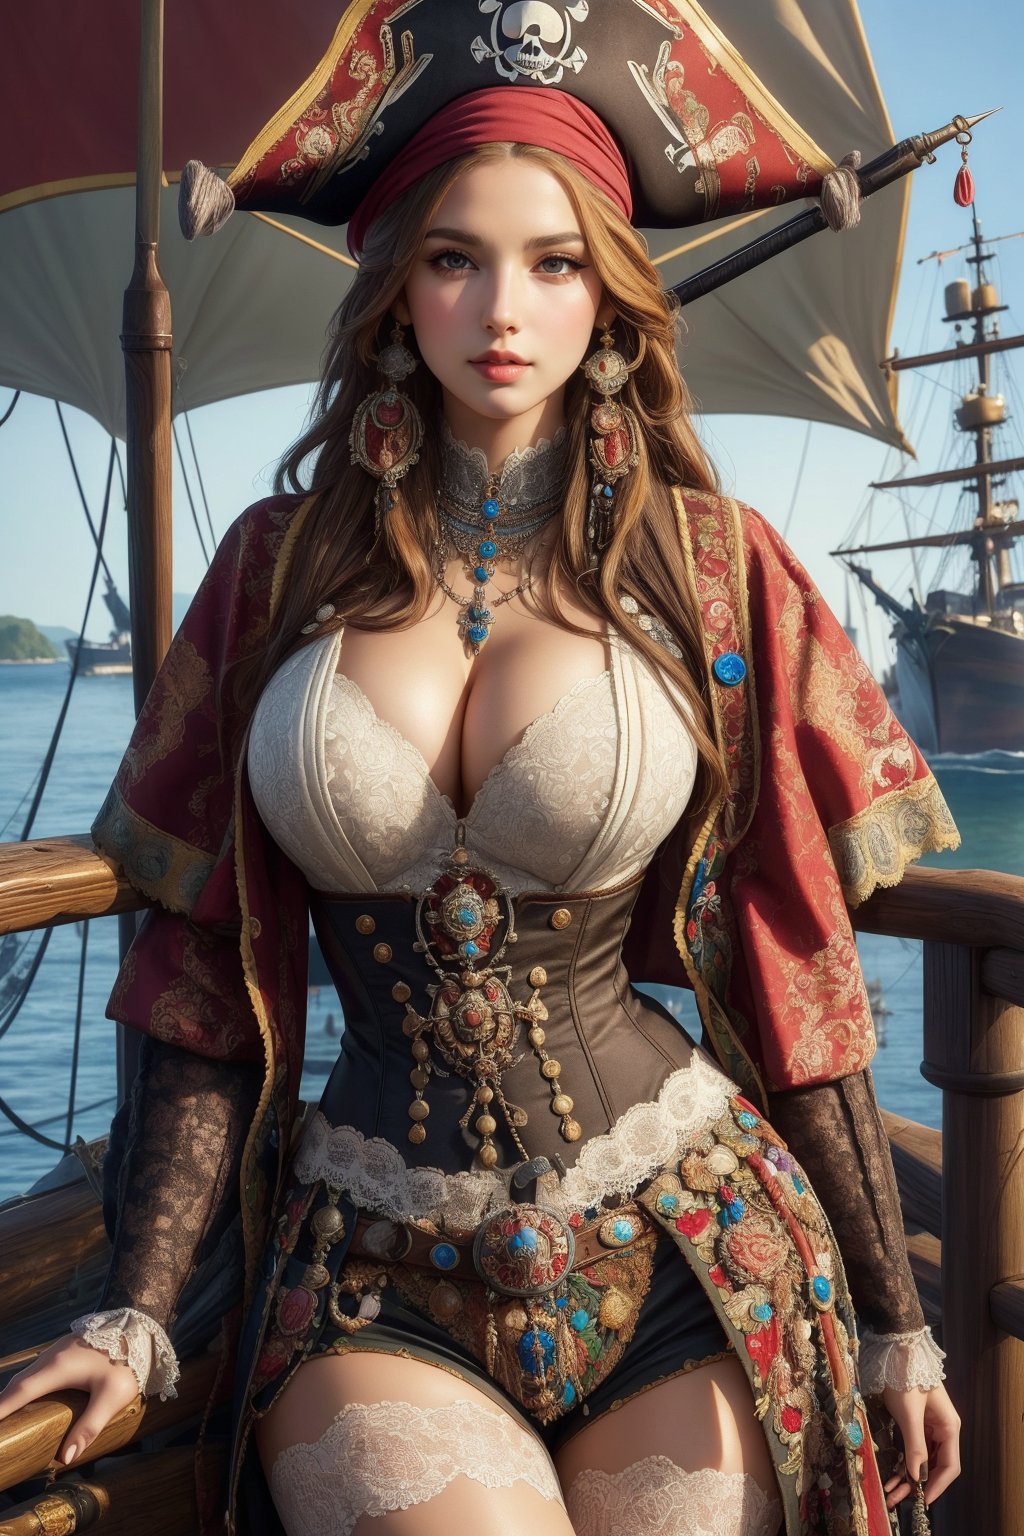 busty and sexy girl, 8k, masterpiece, ultra-realistic, best quality, high resolution, high definition, (1700s Pirate), pirate clothing and attire, 1700s pirate scenery, on board a 1700s pirate ship